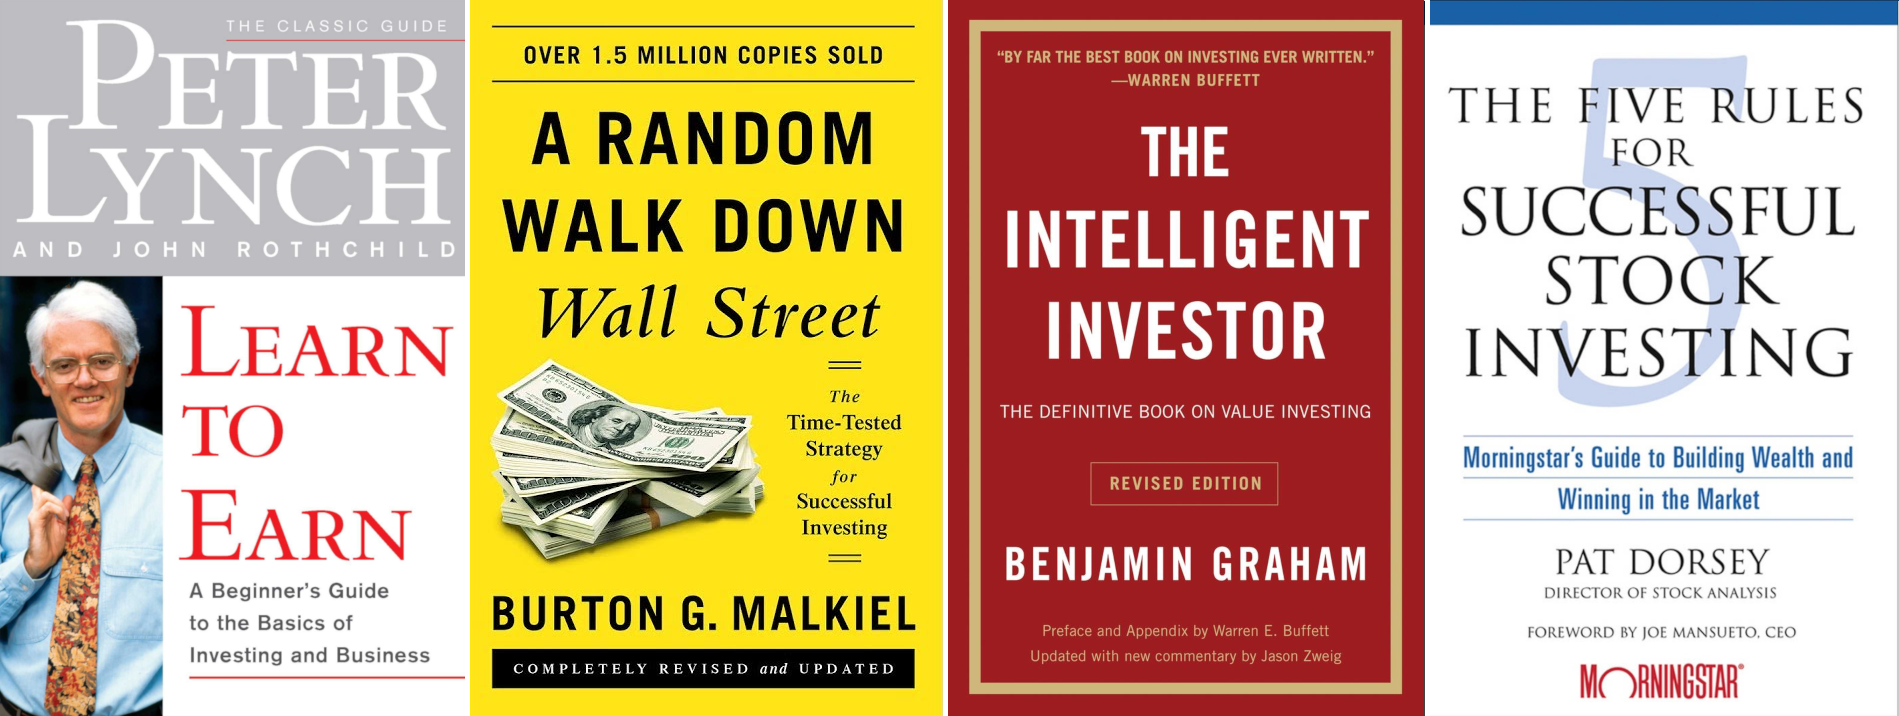 Good books on investing money how to make more money through investing in reits